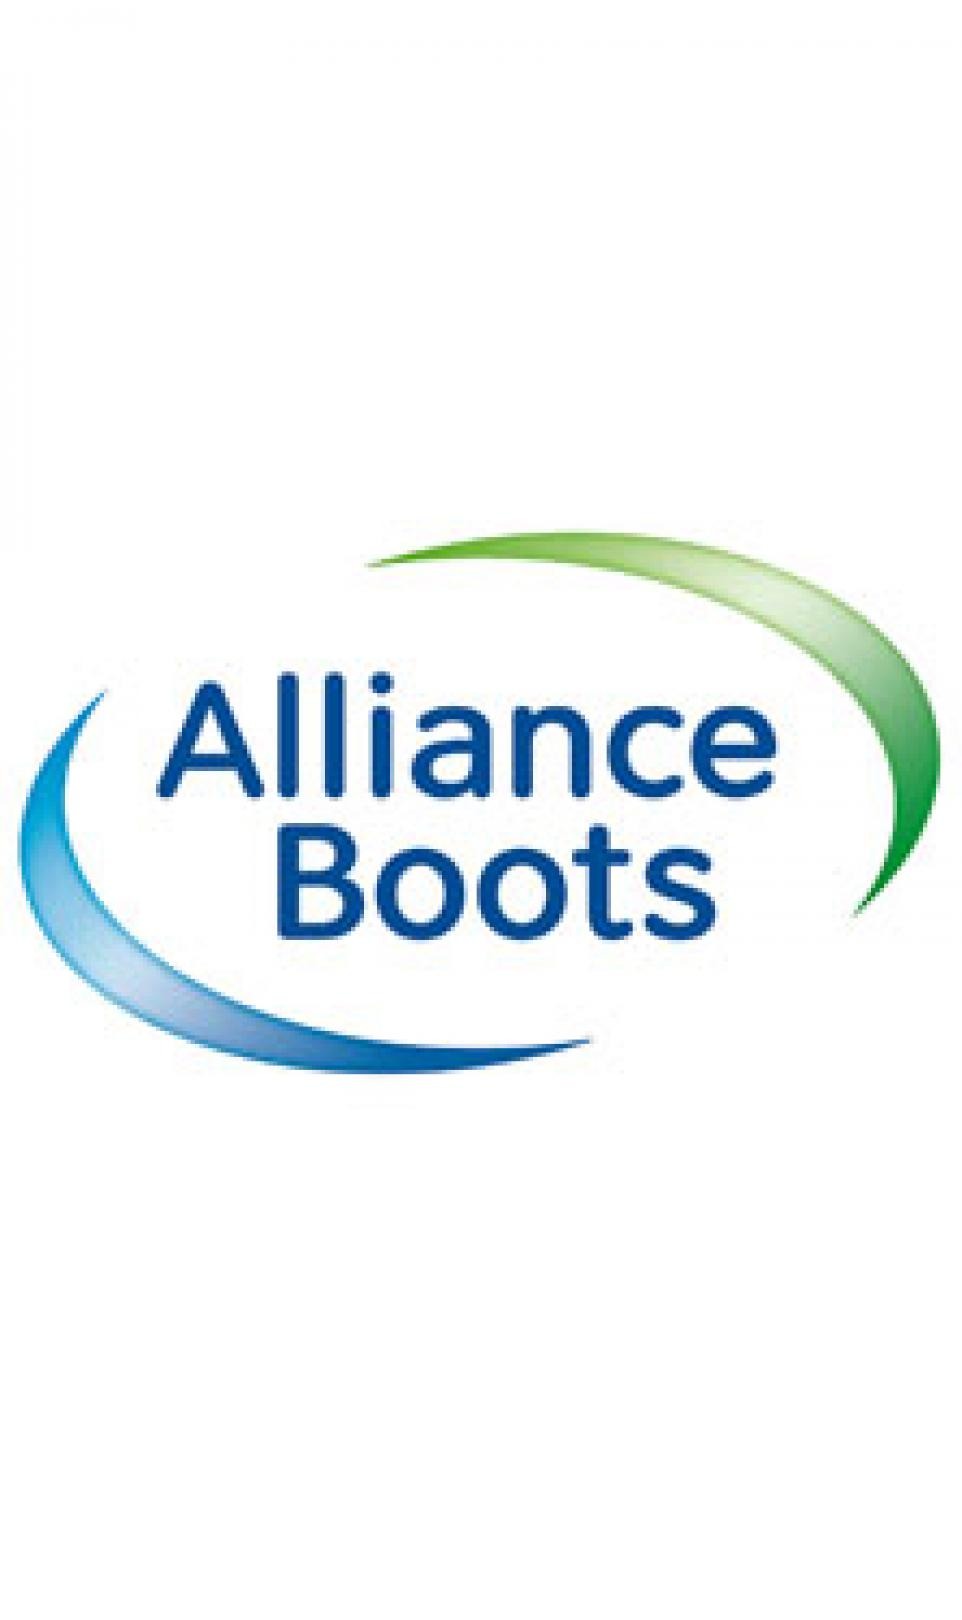 The blue and green Alliance Boots logo, pictured on a white background